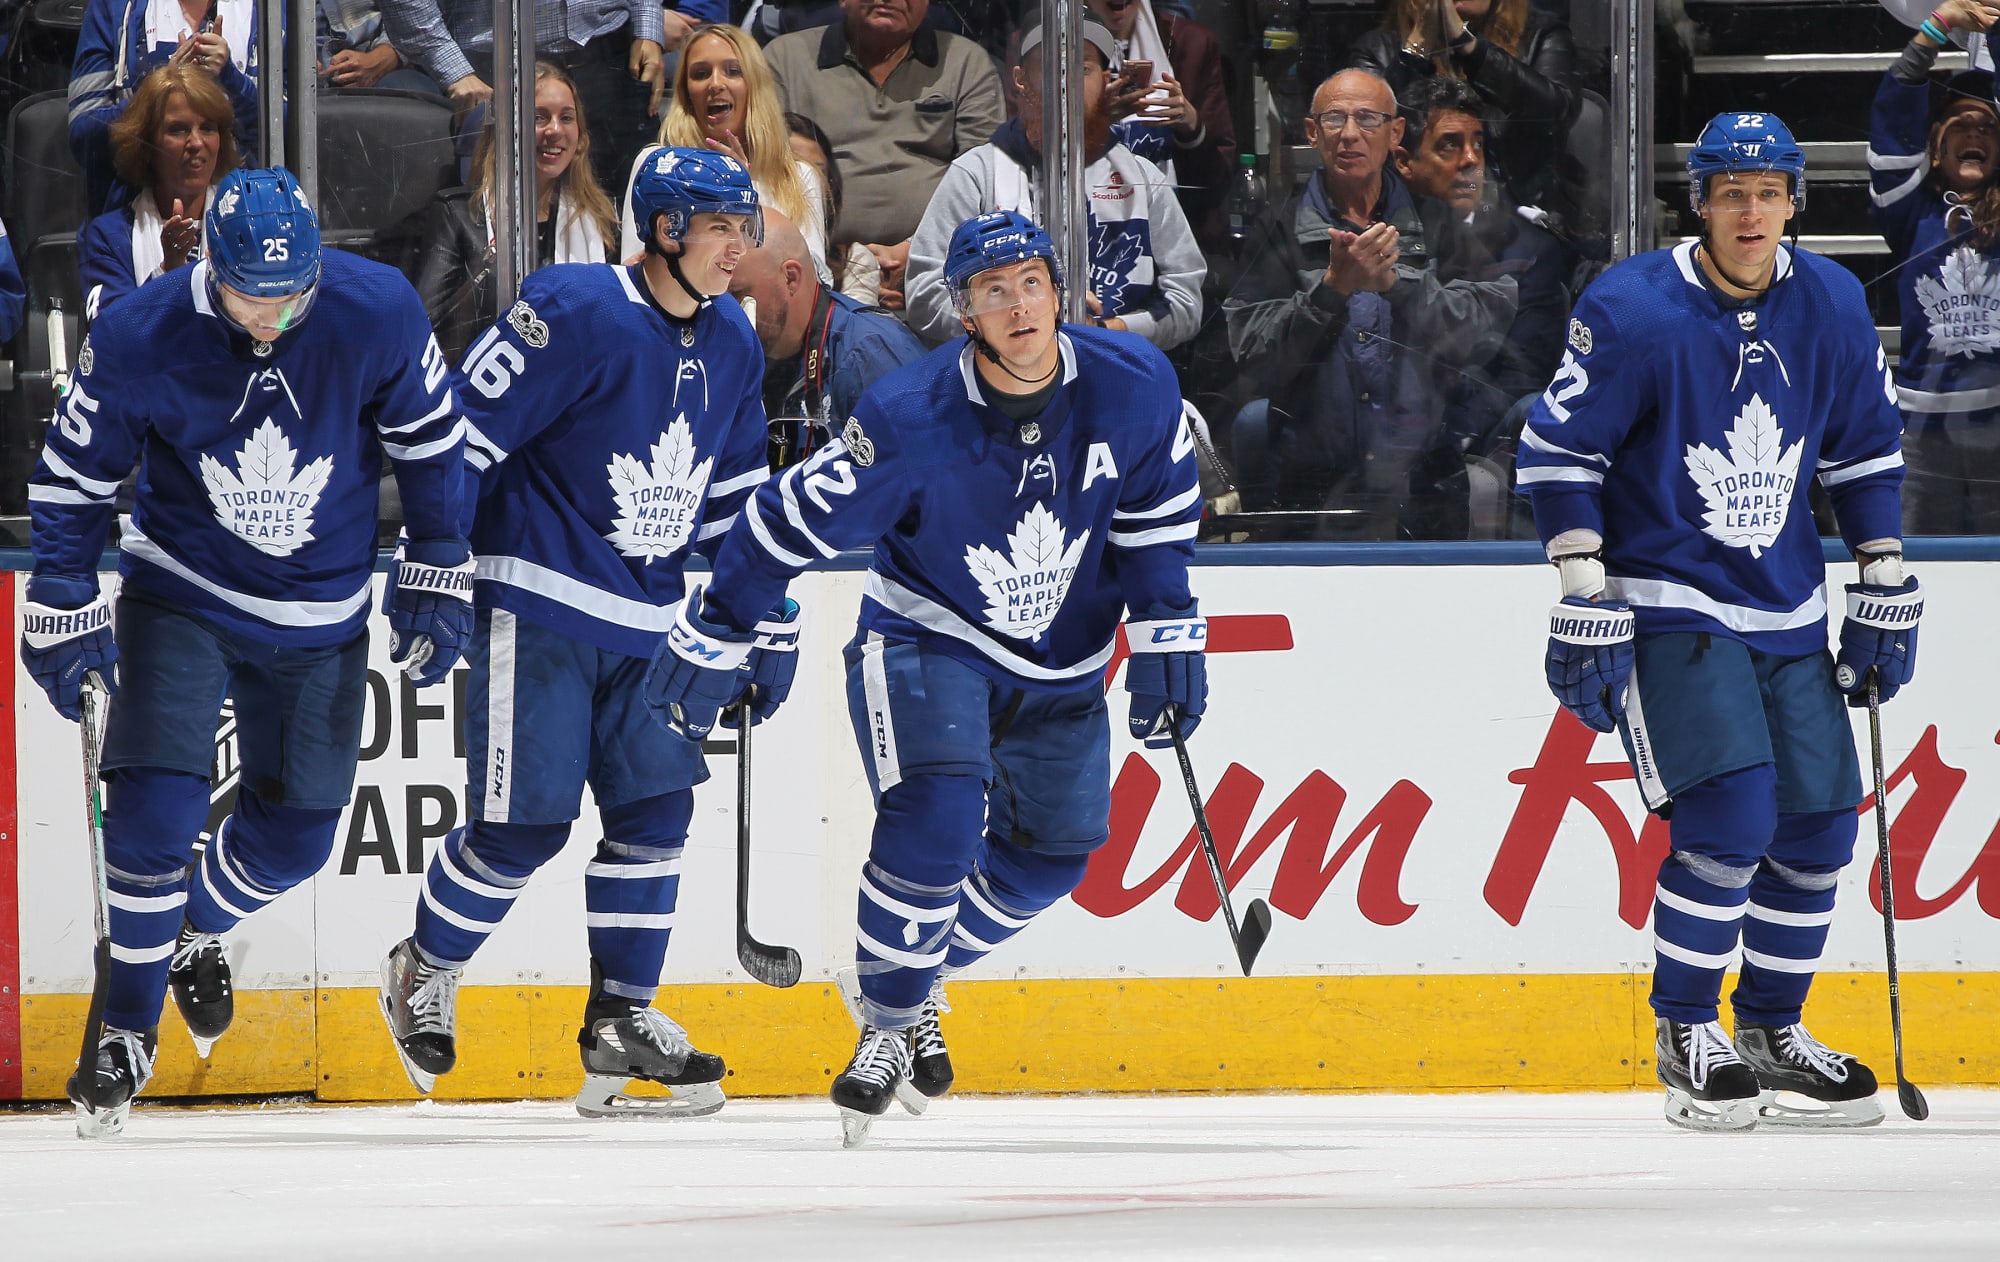 Toronto Maple Leafs Face Habs at Bad Time